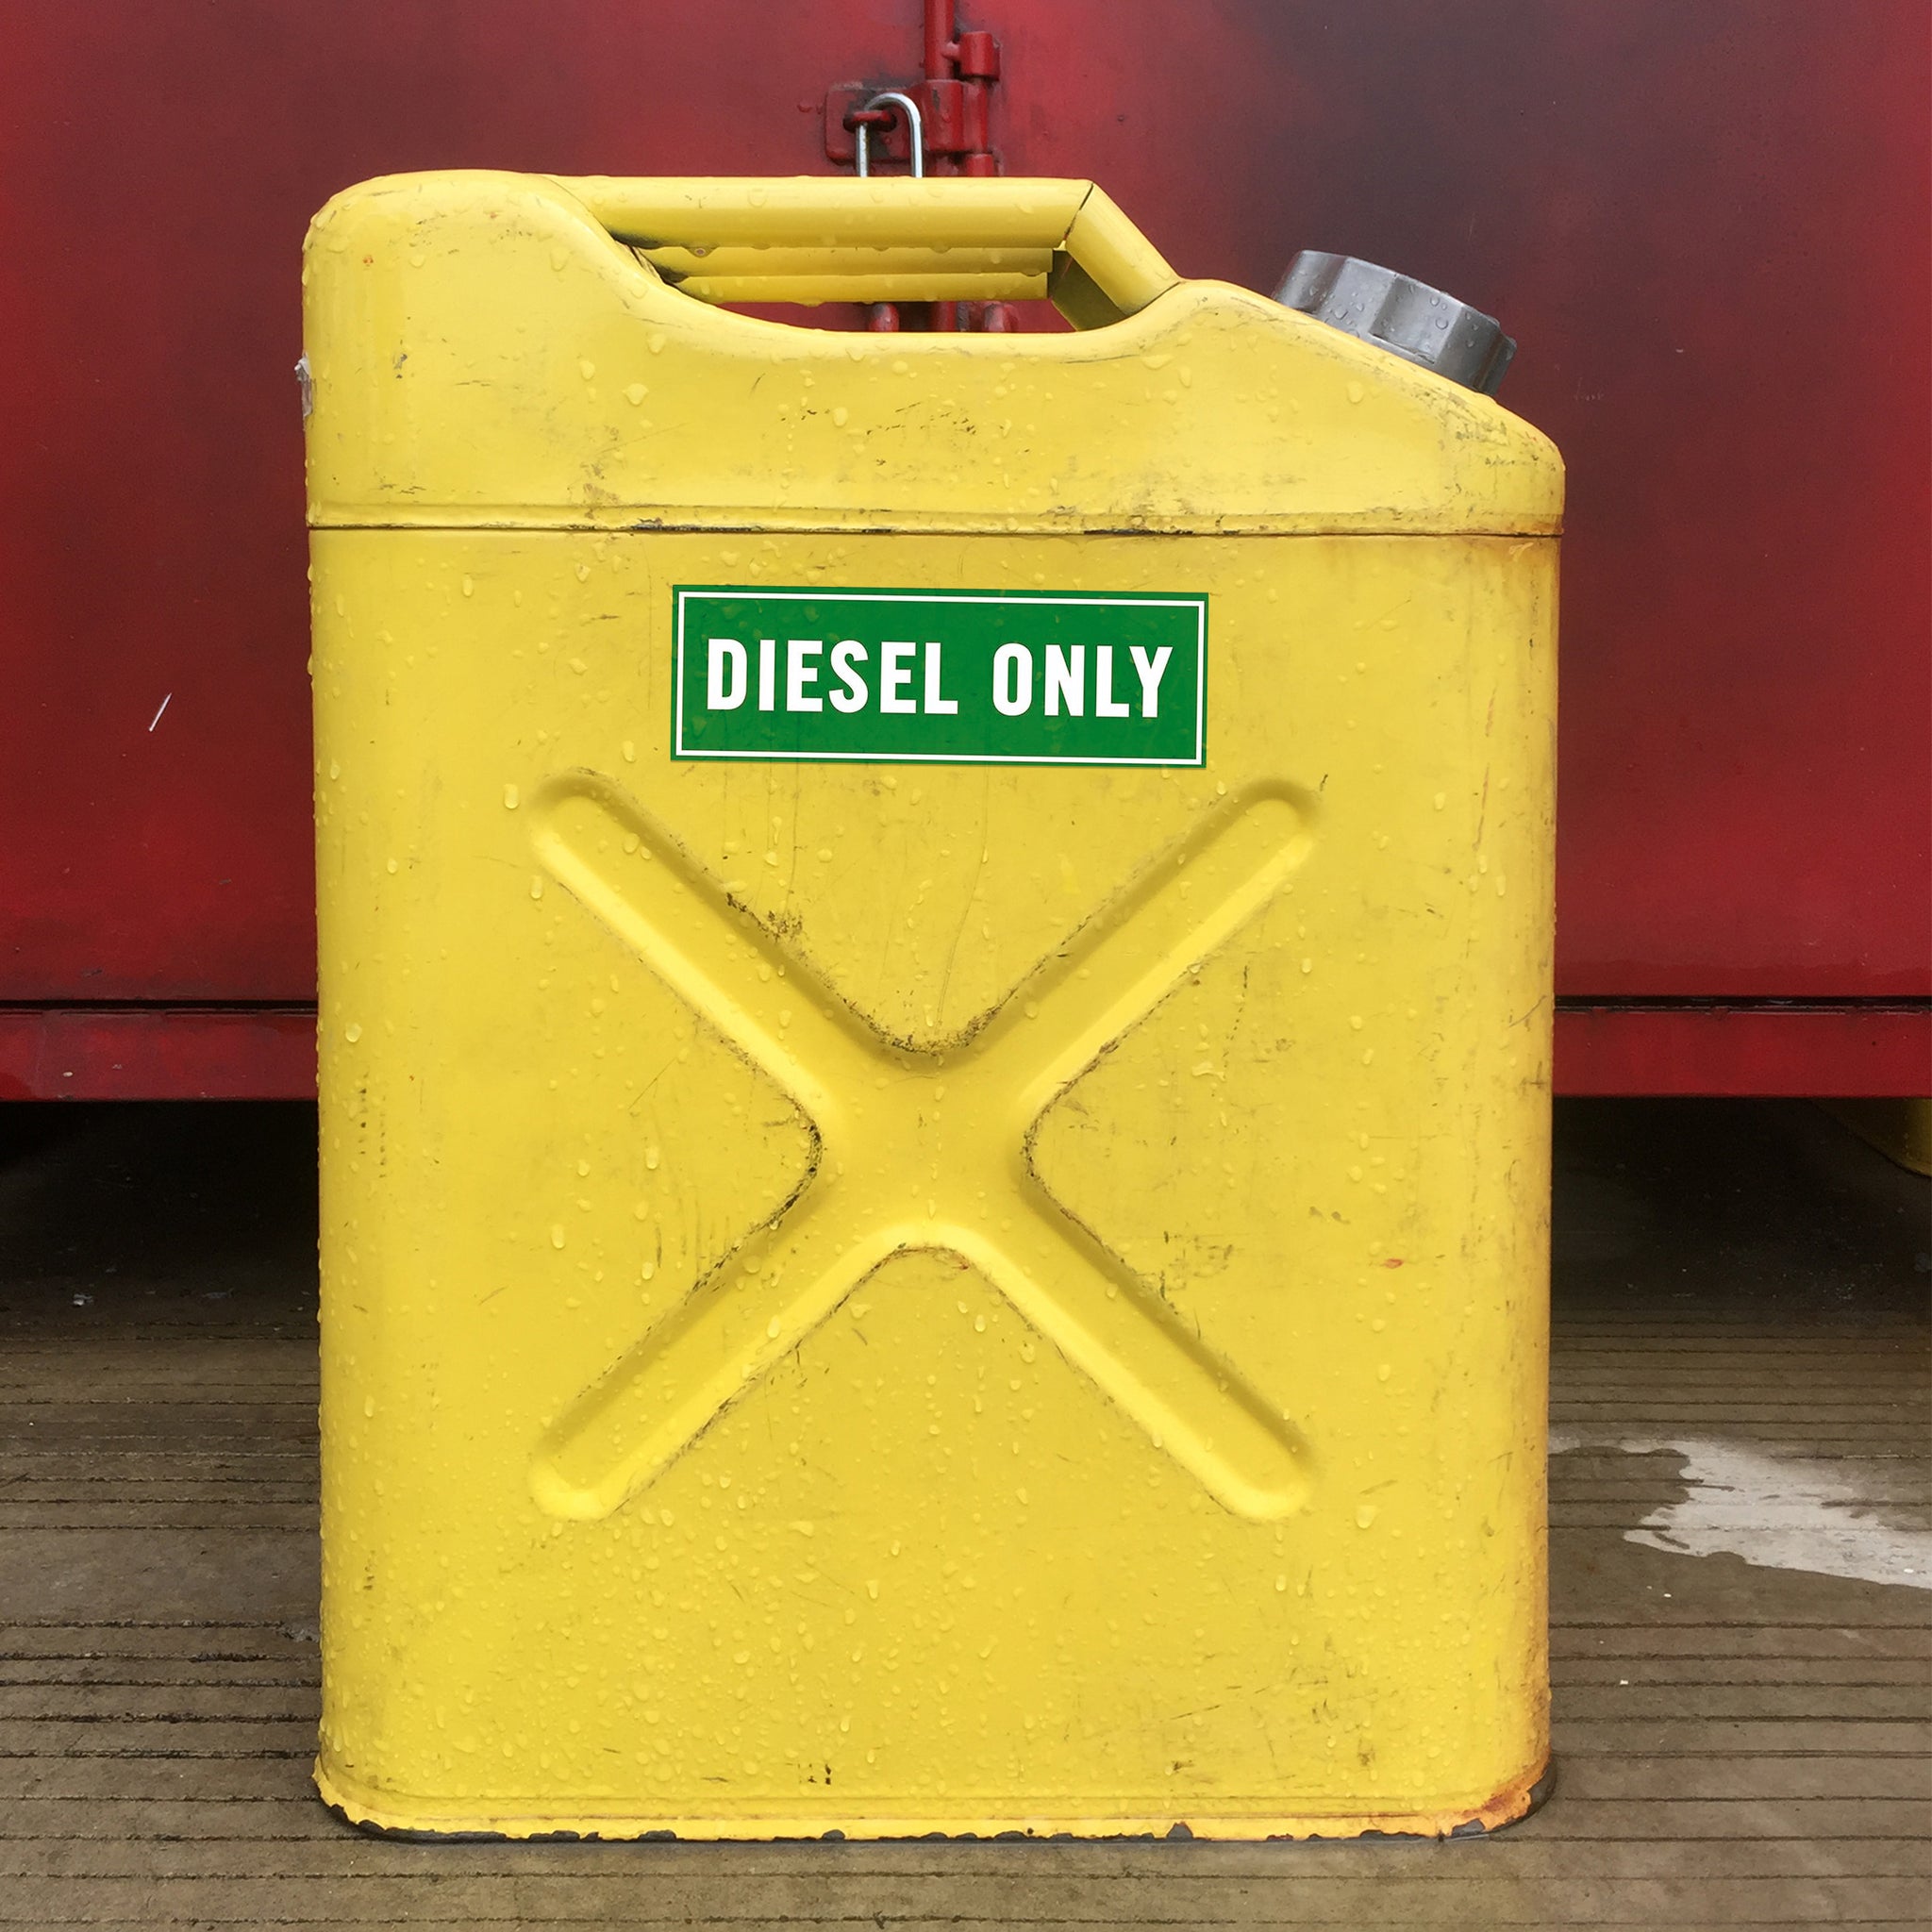 Diesel Only, Gas Only, Mixed Only Sticker - Essential Variety Pack - 2 Label of Each, 6 Total